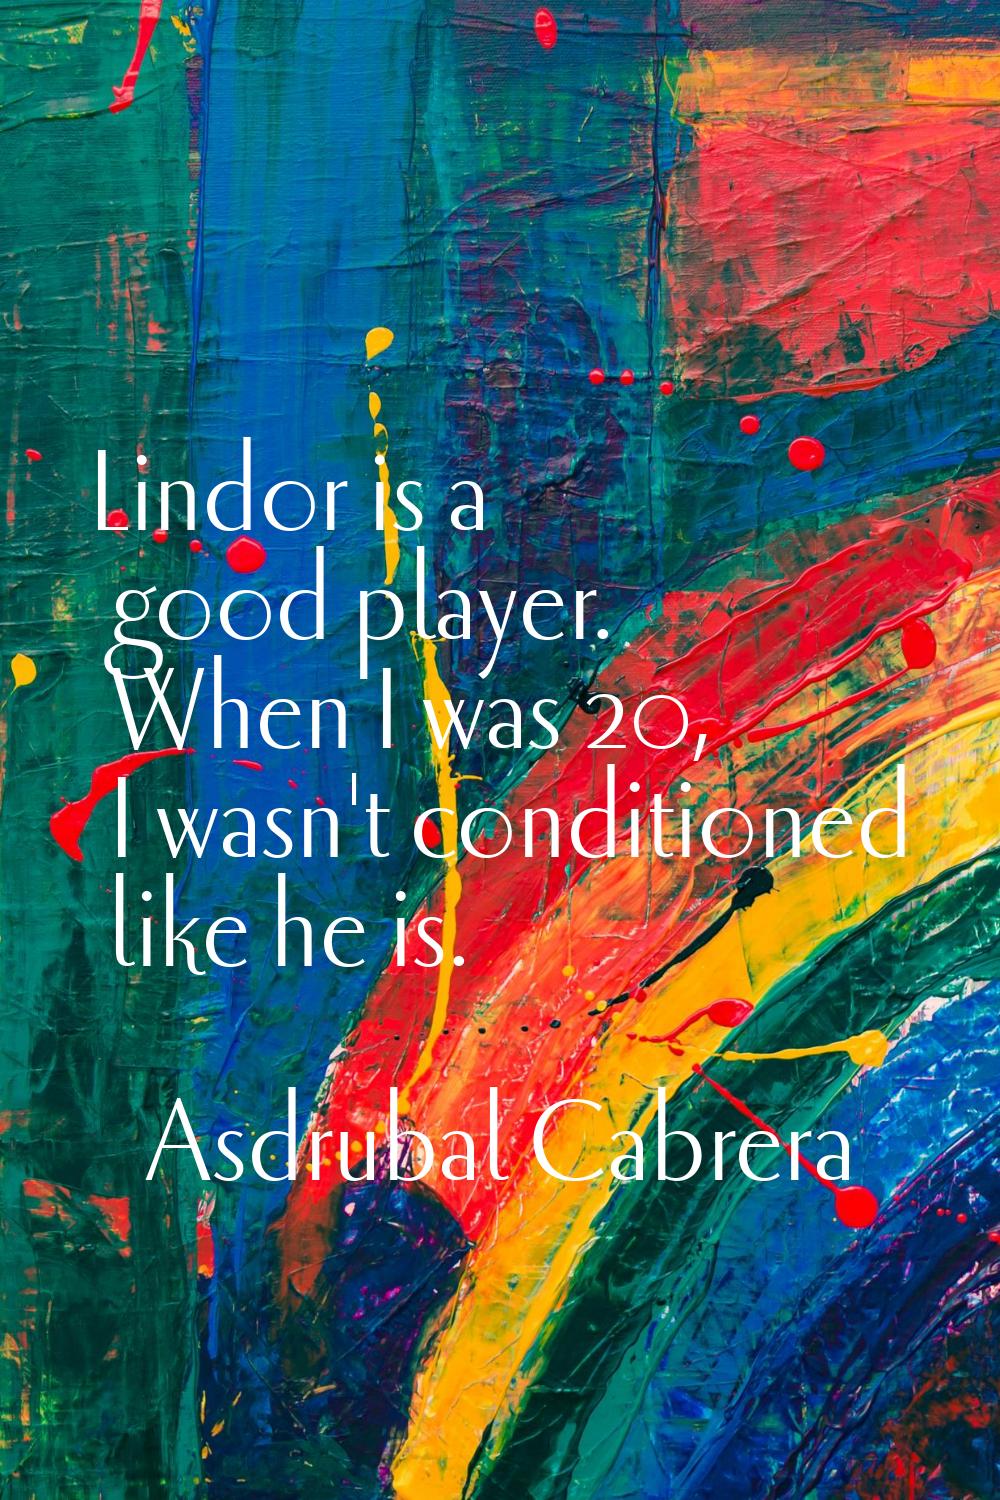 Lindor is a good player. When I was 20, I wasn't conditioned like he is.